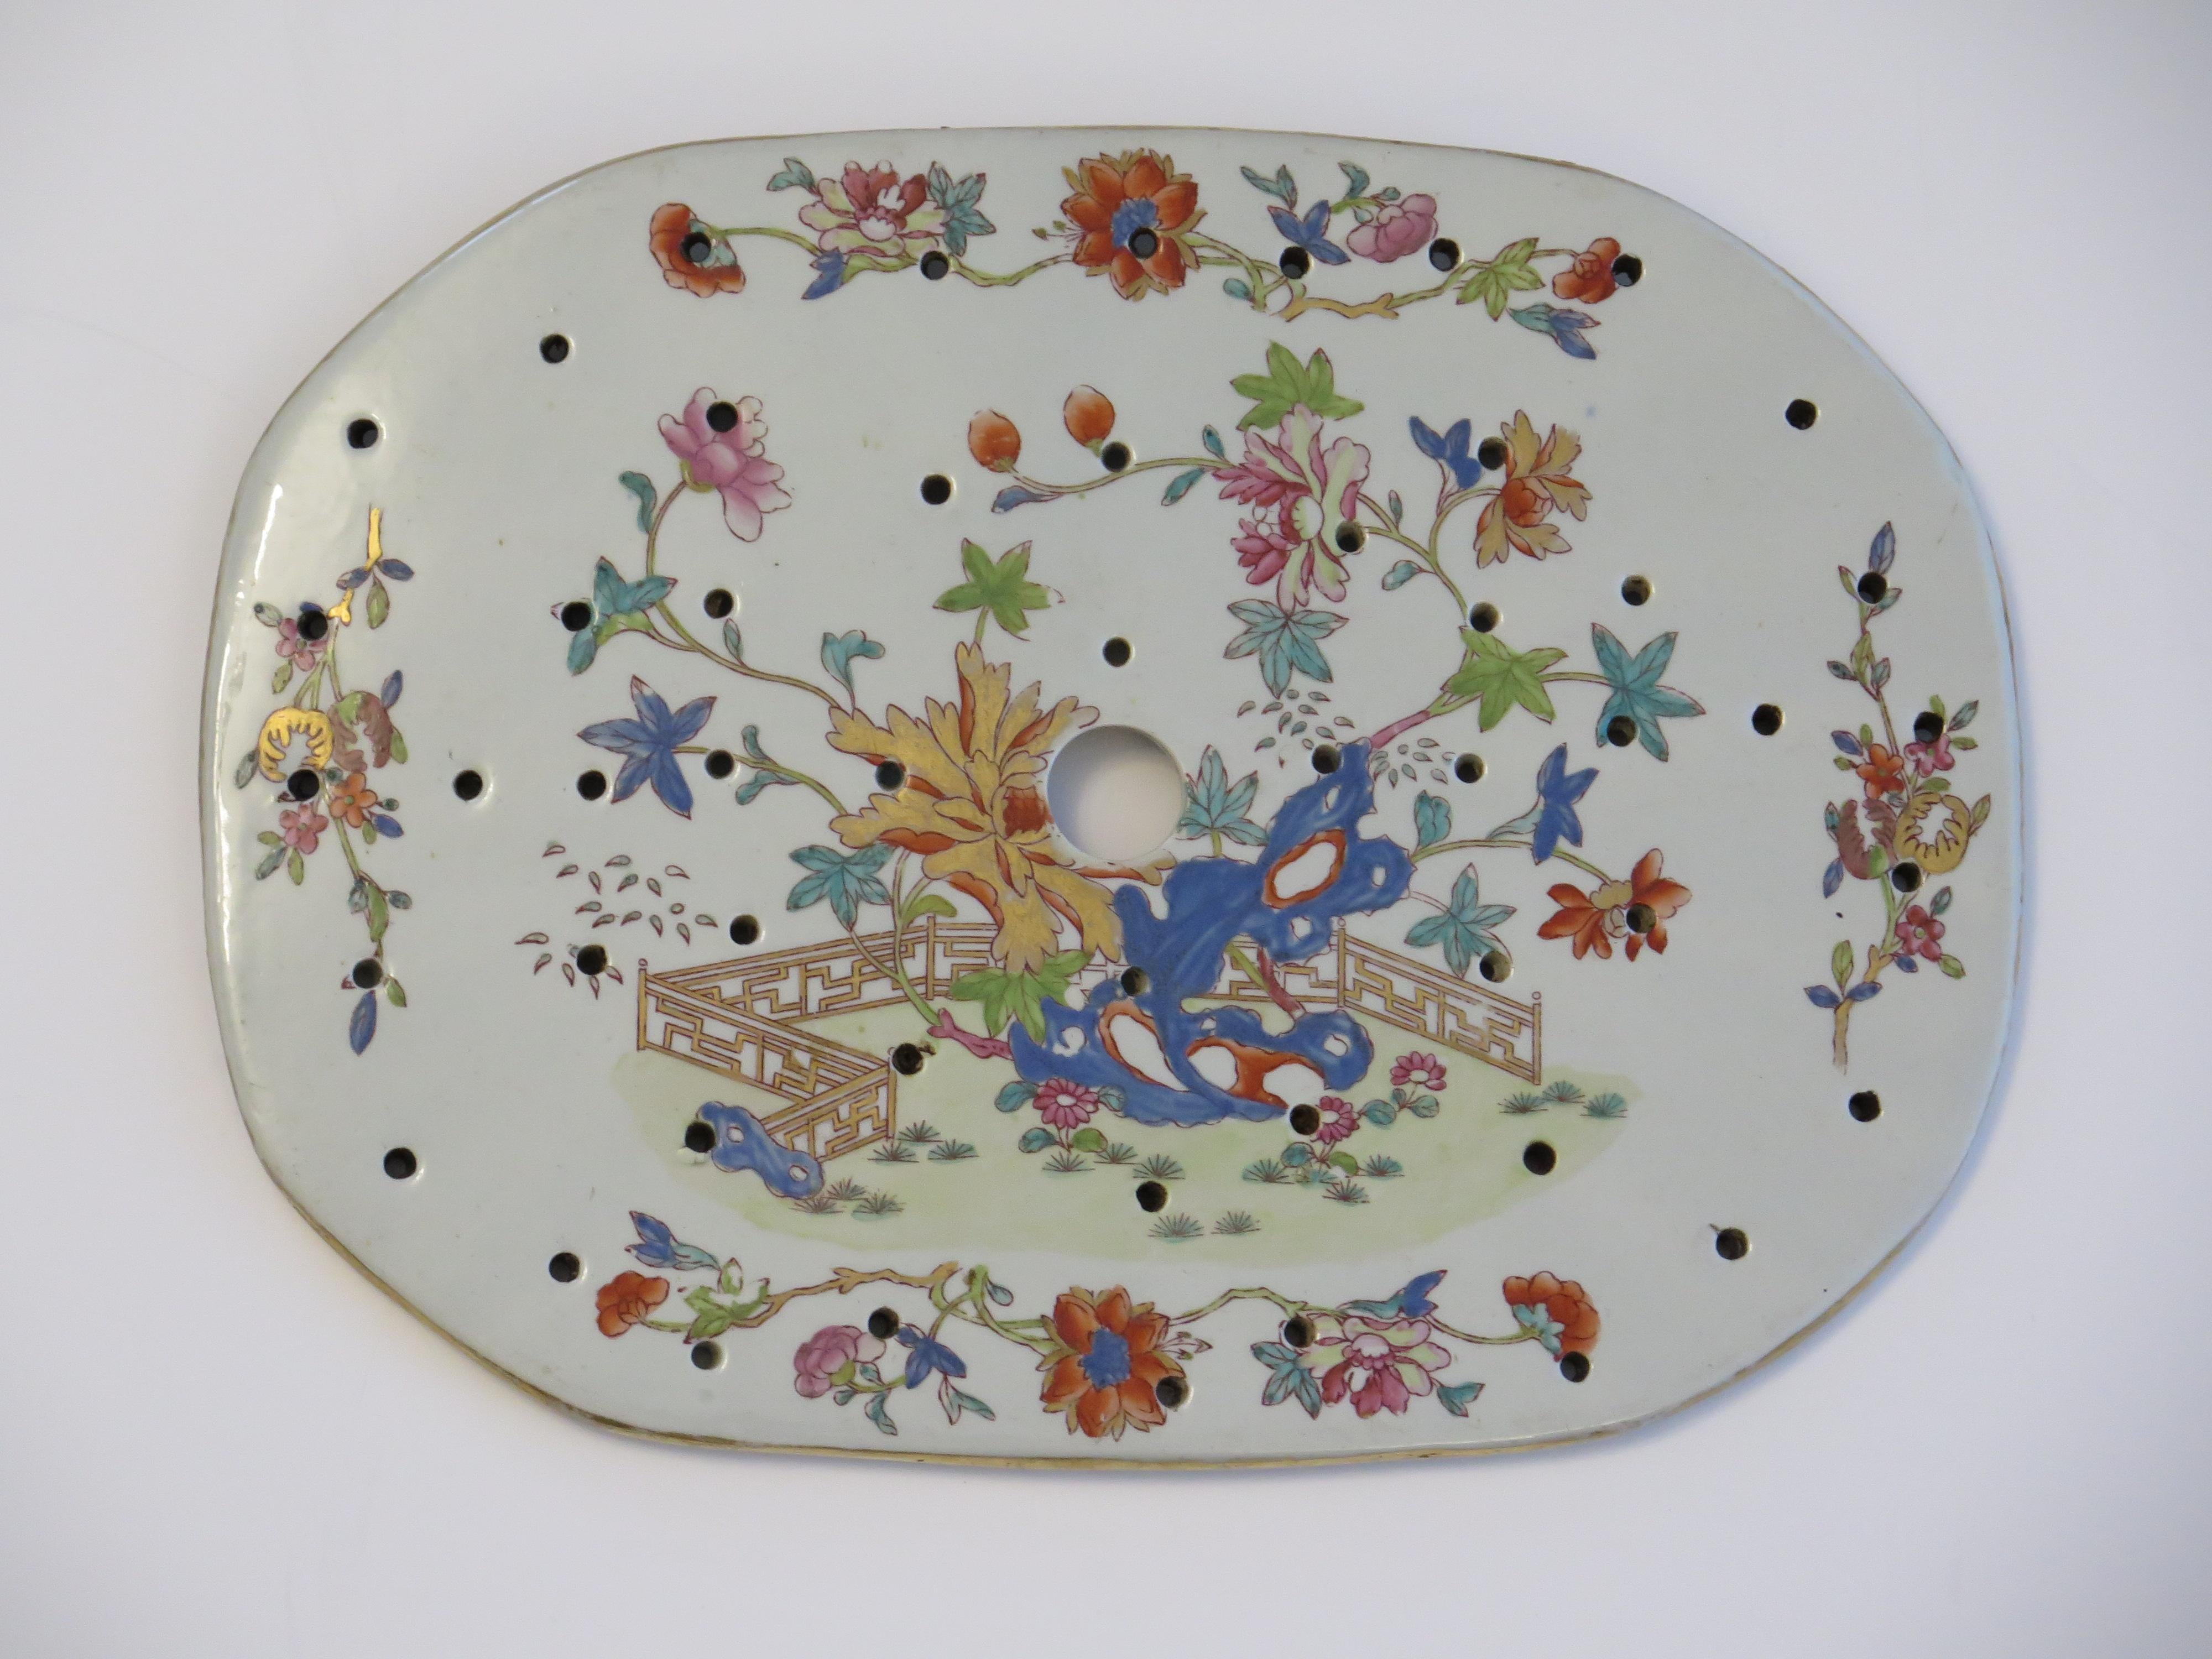 This is a very good hand painted Mason's ironstone Drainer or Strainer Plate, in the Fence, Rock and Tree gilded pattern, from their earliest George III rd period, circa 1818.

The piece is well potted with an oval / octagon shape having one large